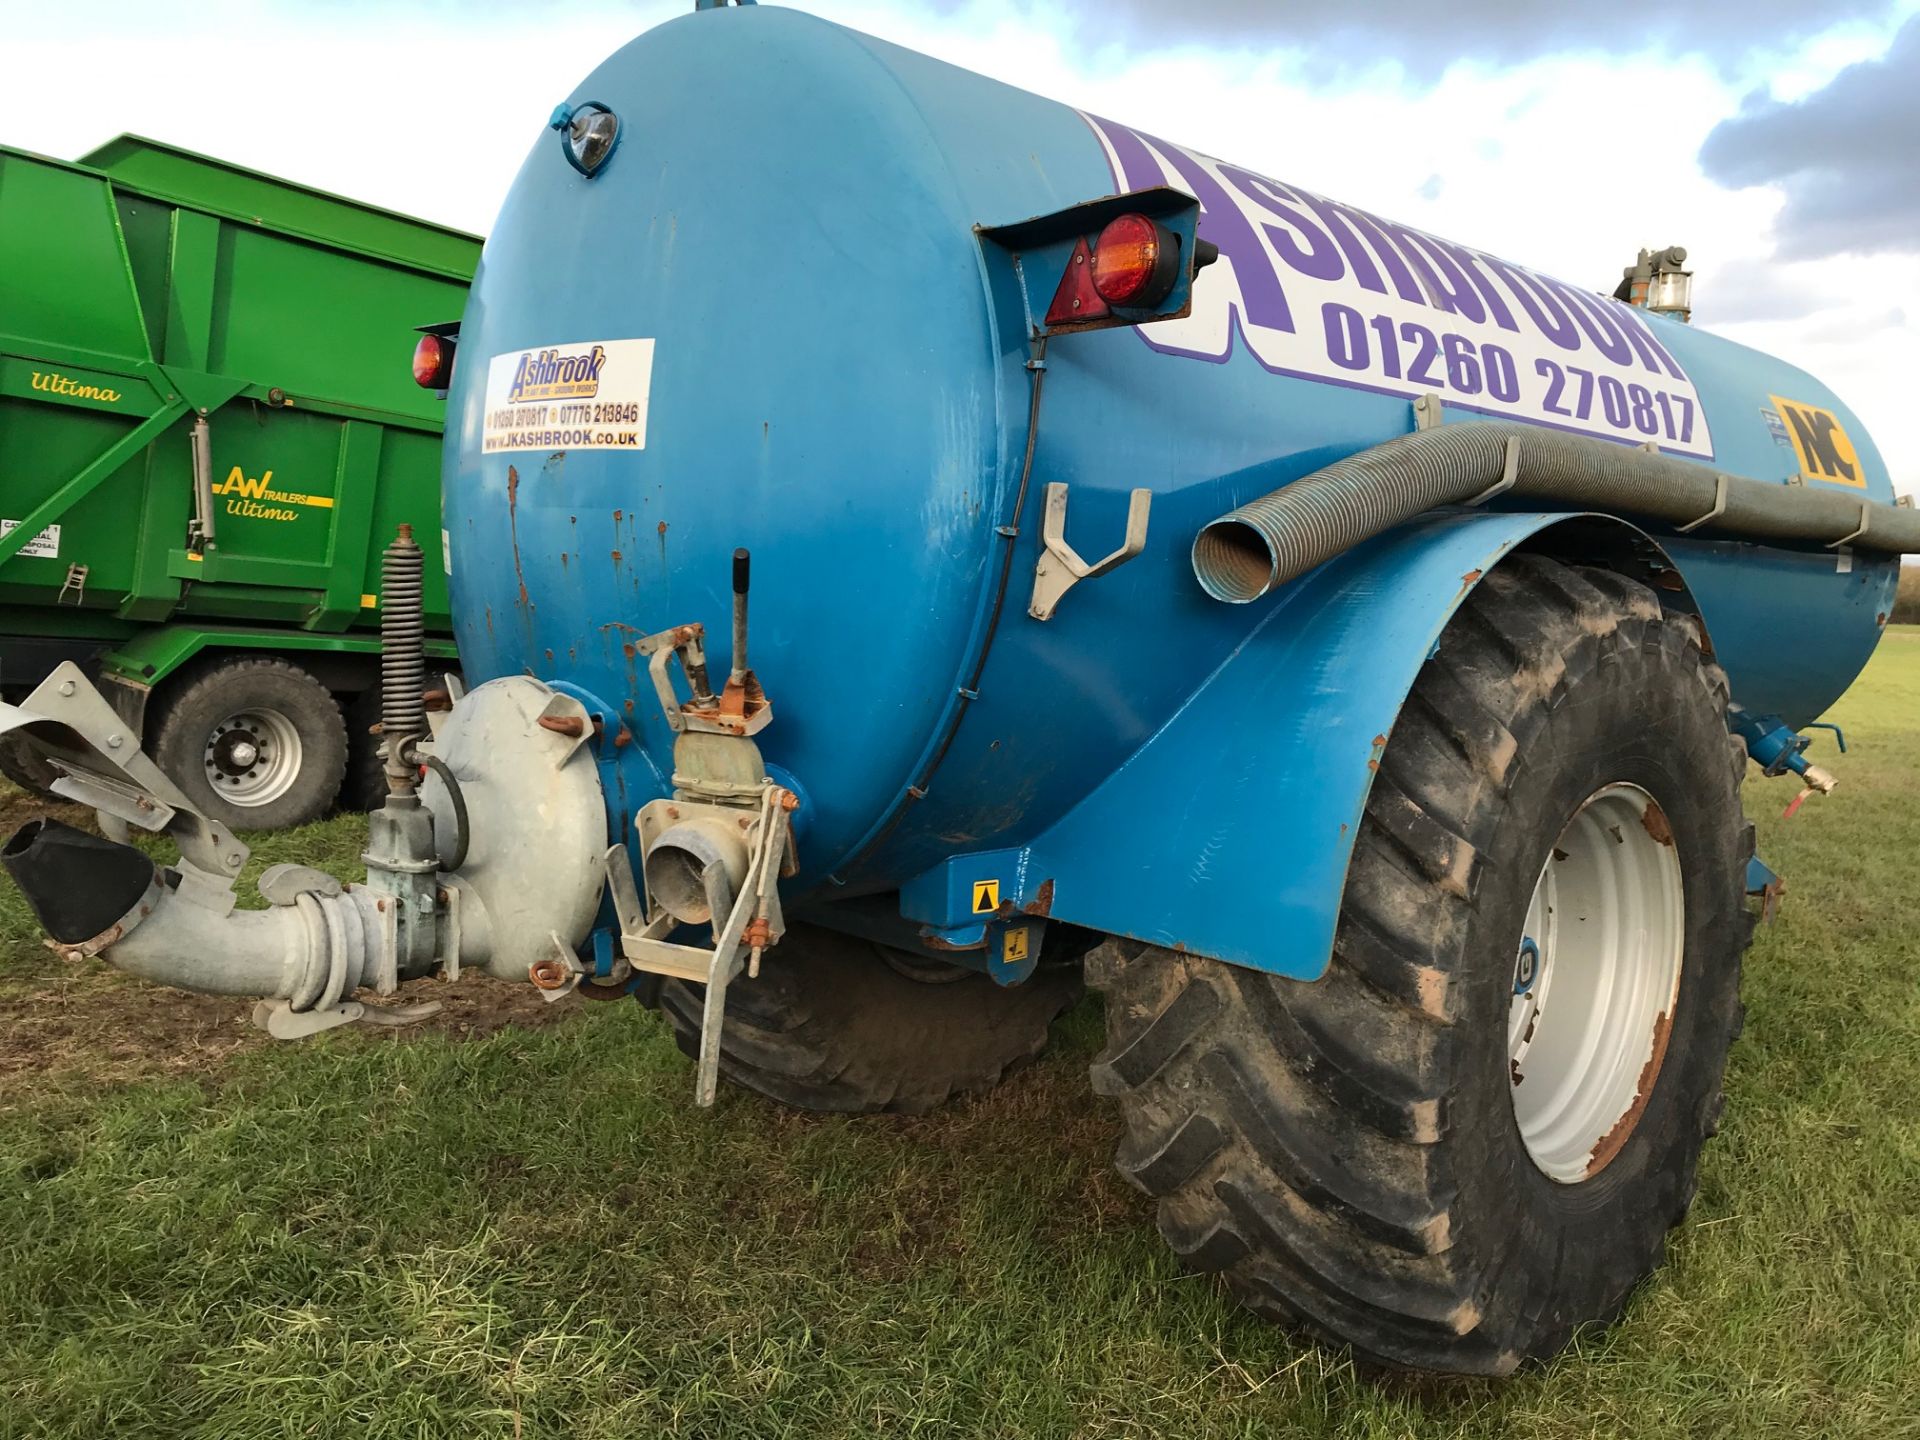 2014 NC 3000 Gallon Tanker, Sprung Drawbar, 4 Outlets, Alliance 800/65 R32 Tyres - Image 2 of 6